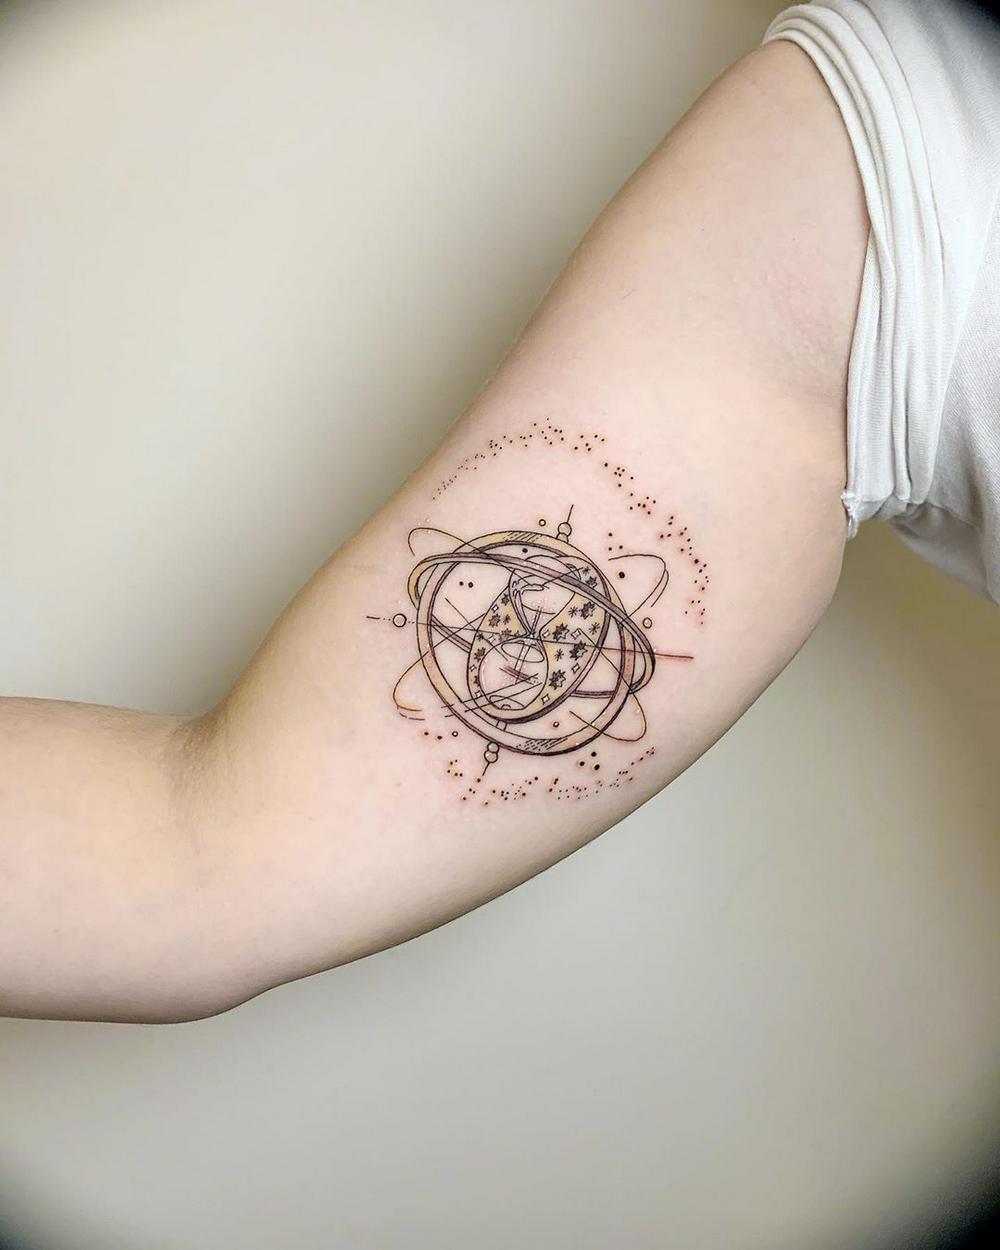 My own Harry Potter time turner tattoo It overwhelms me when I see how so  many others have potter tattoos aswell a  Harry potter tattoos Tattoos  Sleeve tattoos